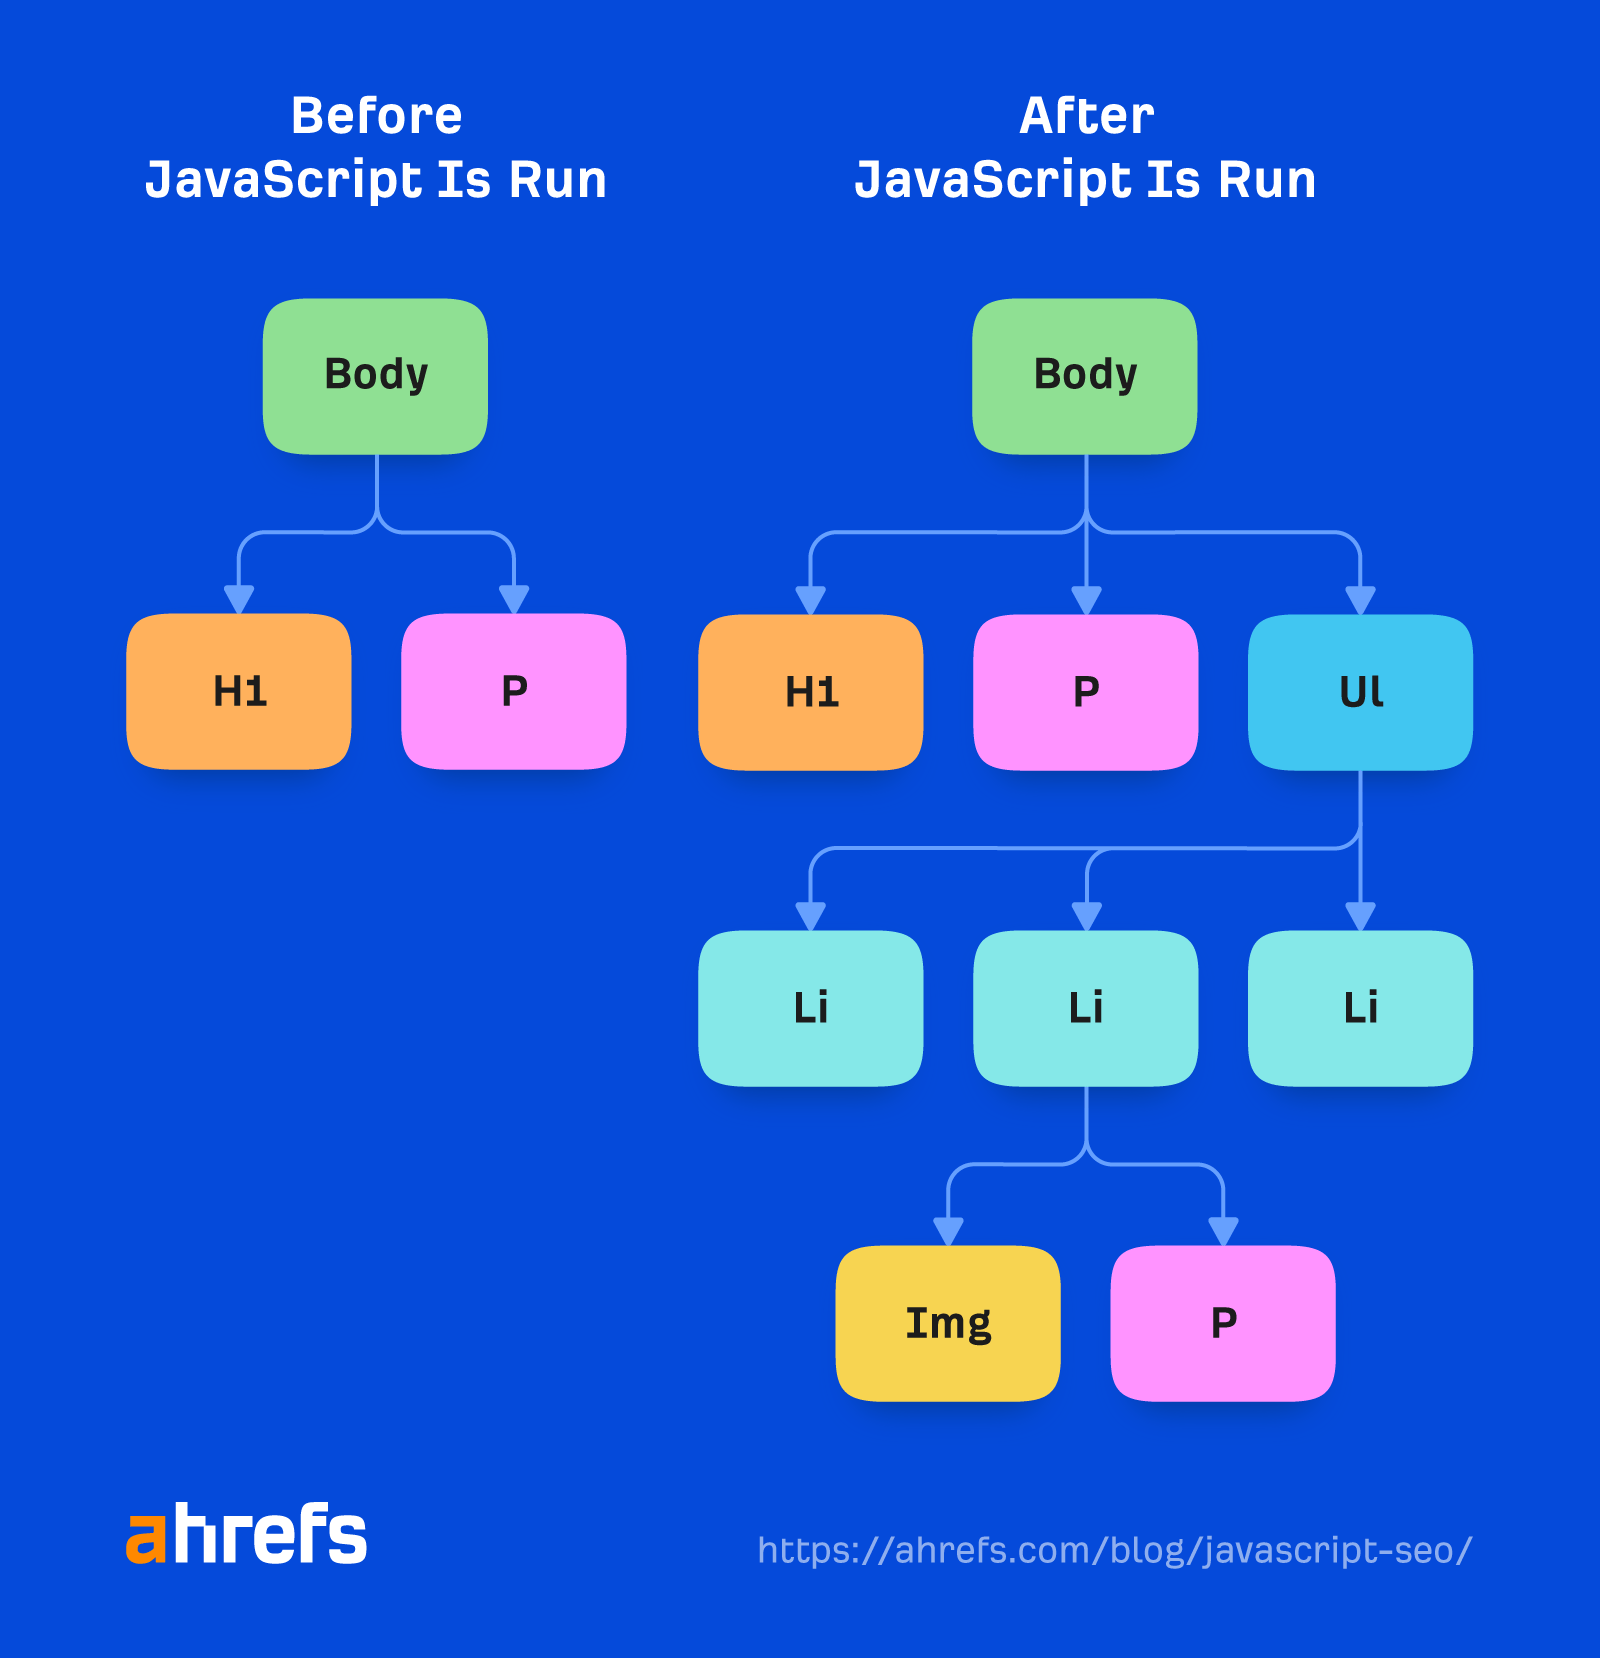 Illustration of how JavaScript can change the DOM